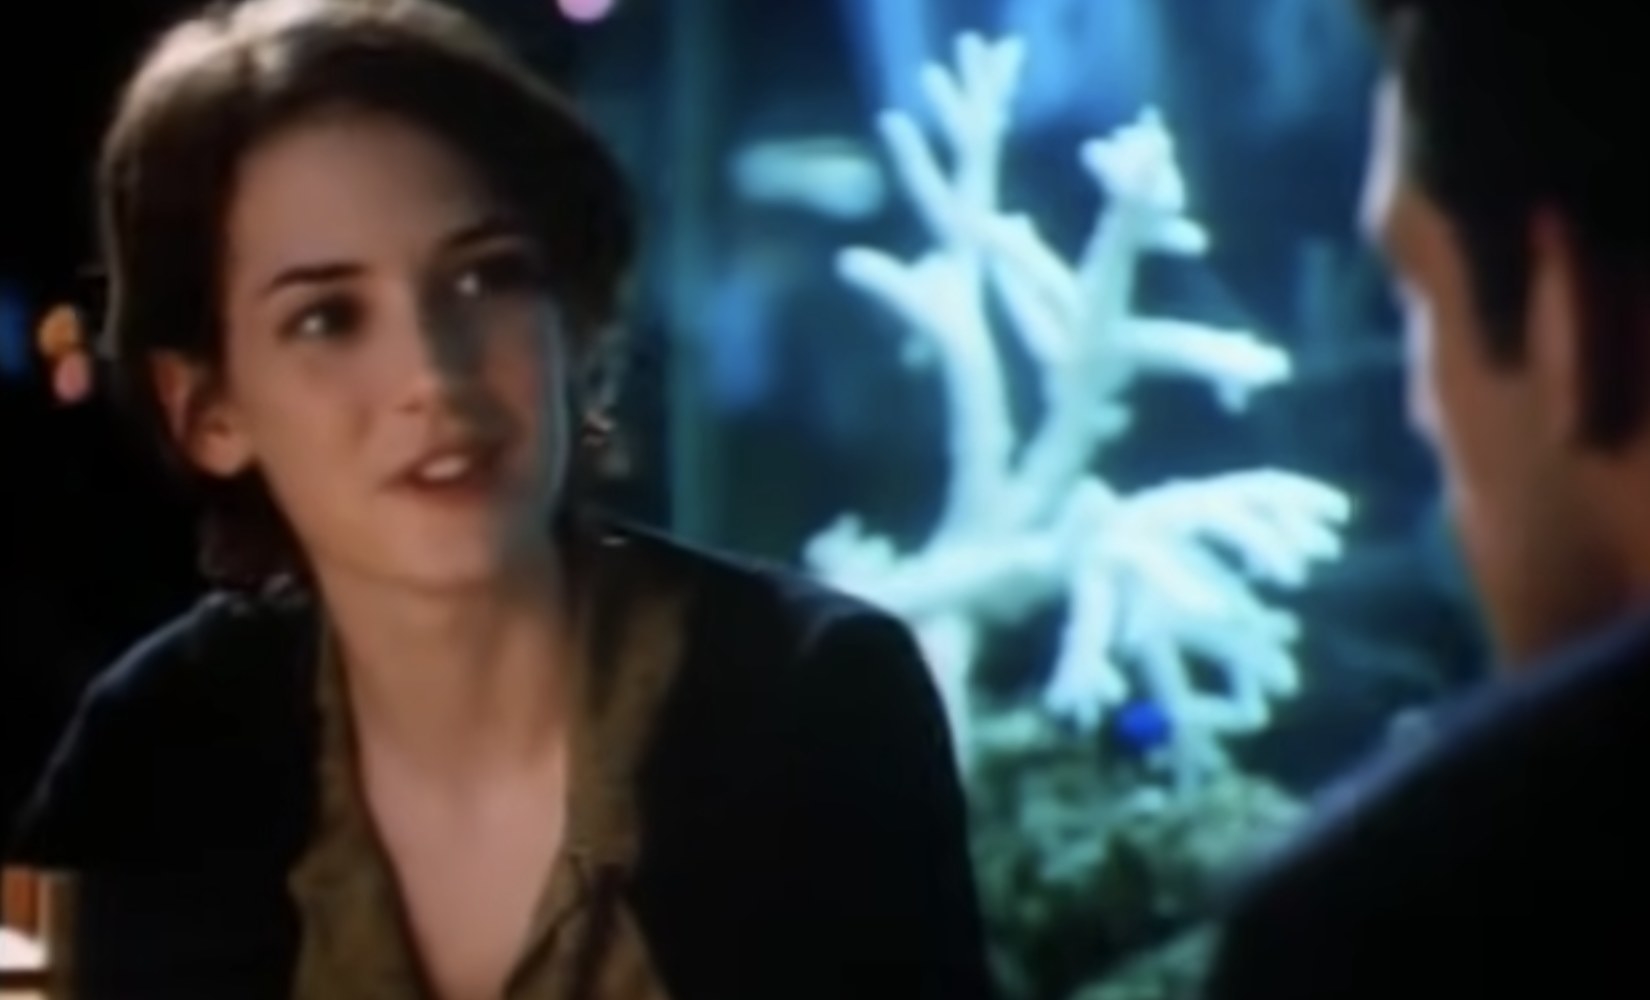 Winona Ryder smiles with her head cocked sideways. Behind her is a fishtank with coral.